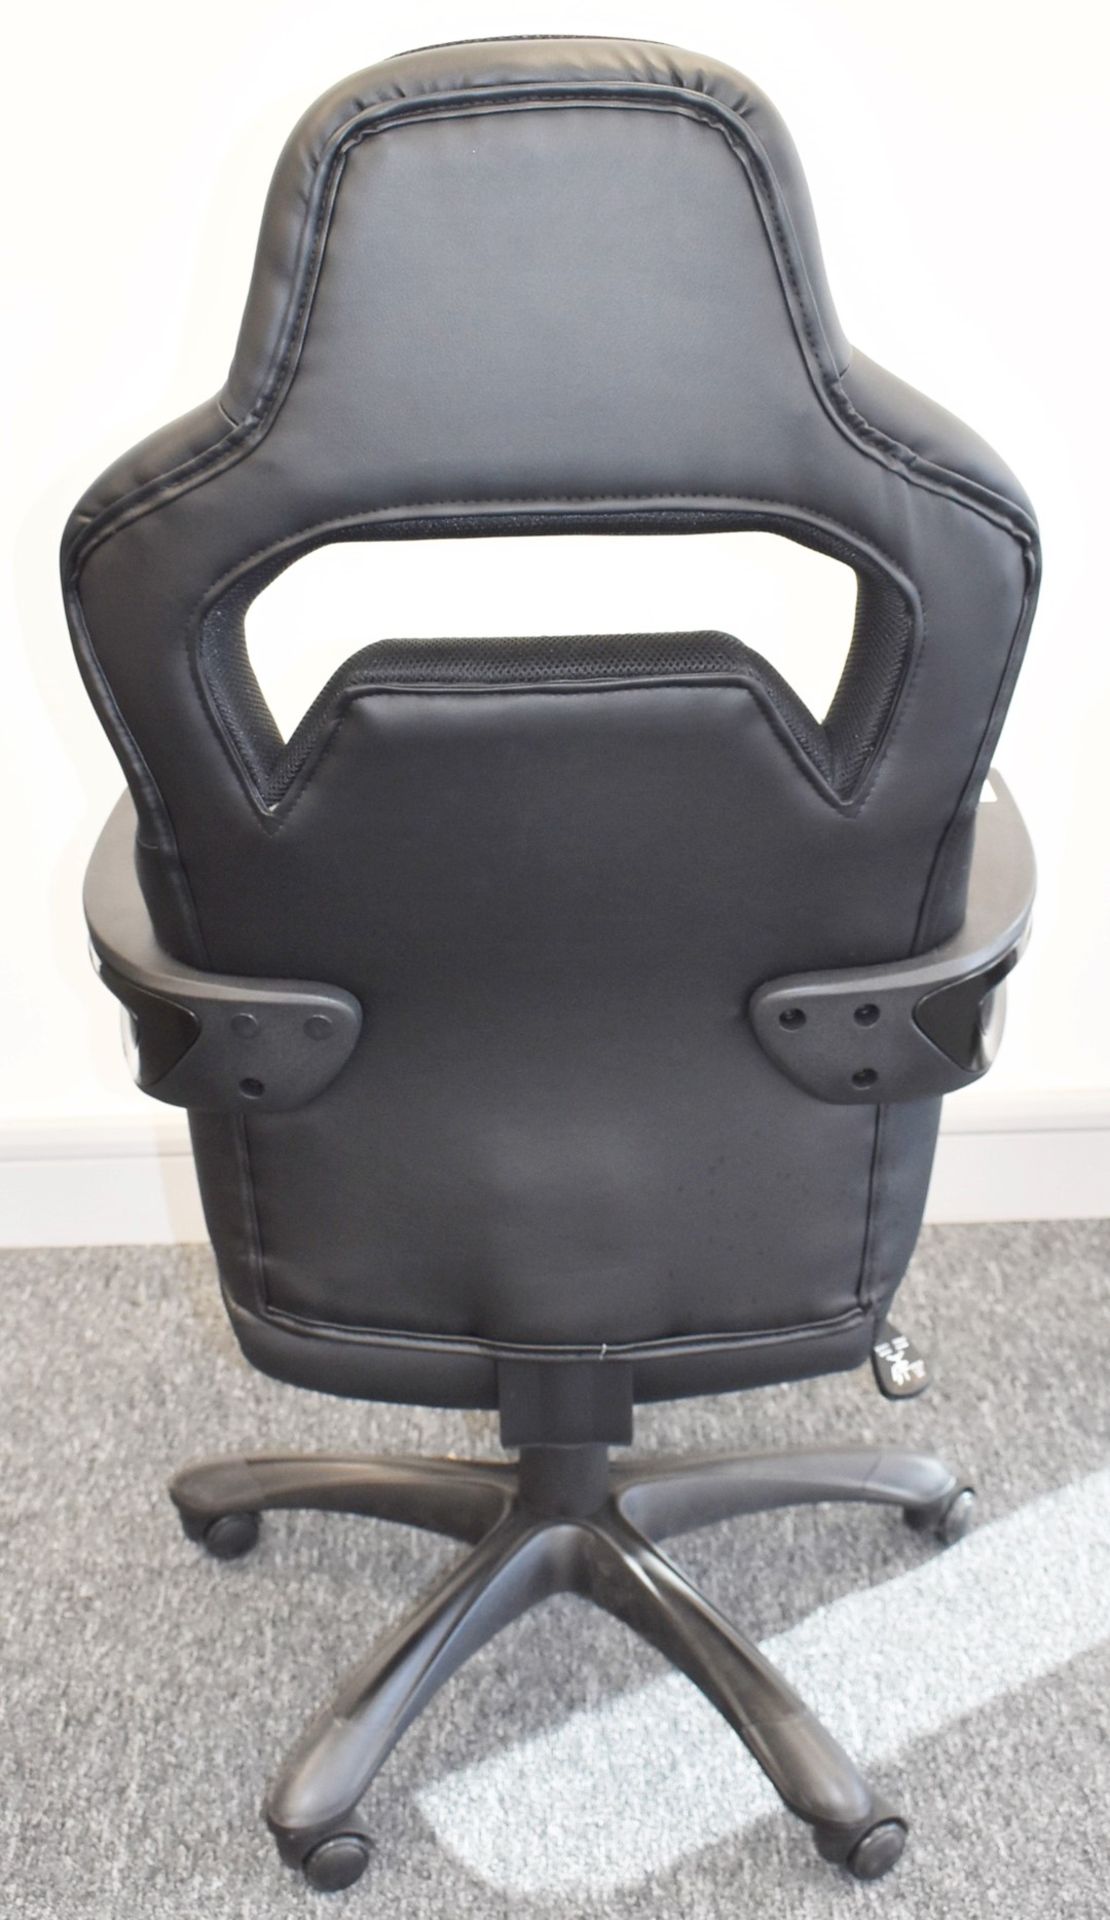 1 x Nitro Concepts Evo Gaming Swivel Chair - Faux Leather and Fabric Upholstery in Black - Image 7 of 9